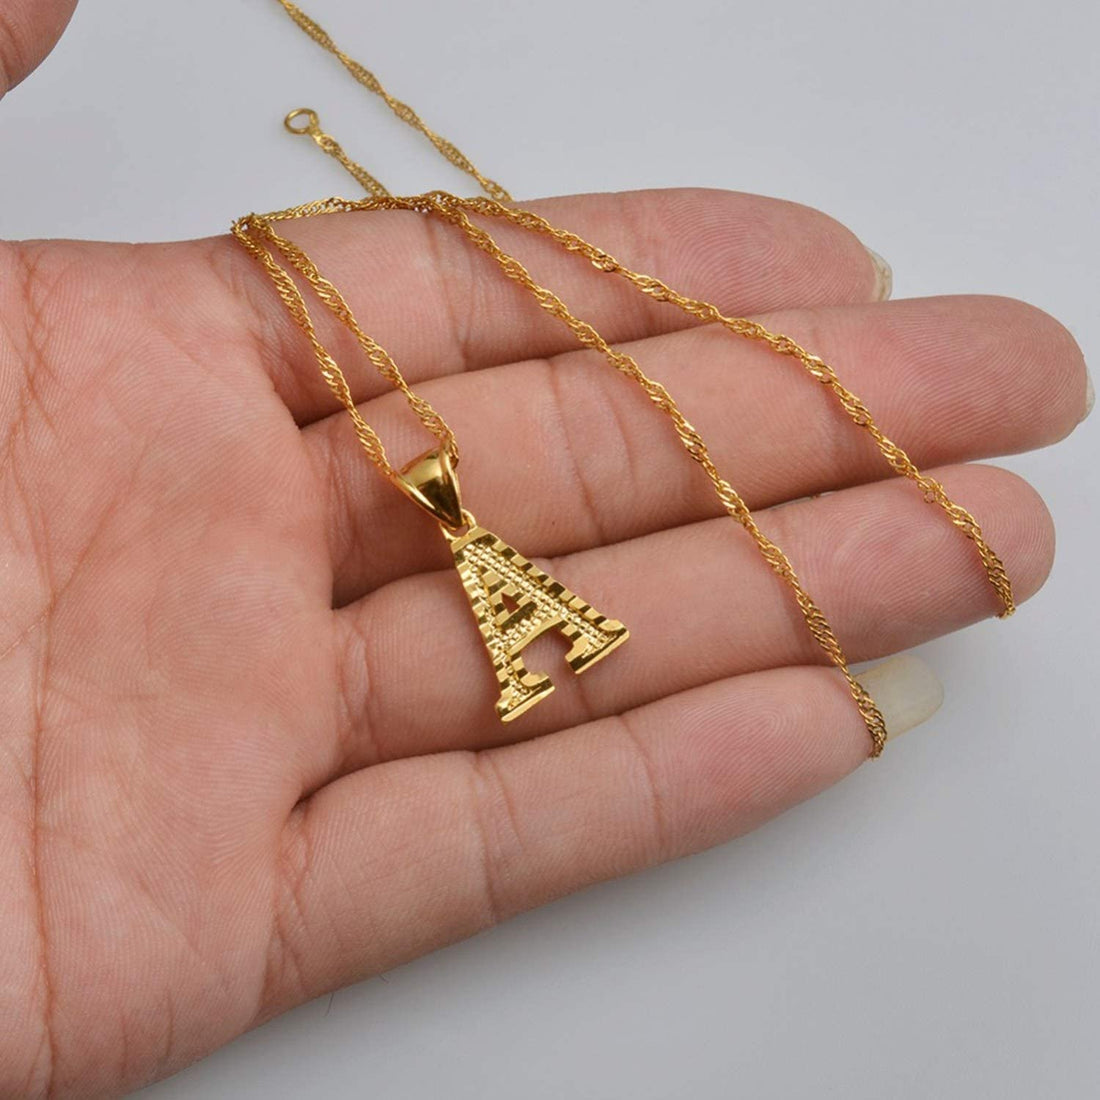 Pressed Gold Letter Necklace - Darlings Jewelry | Express Yourself Through Bling!